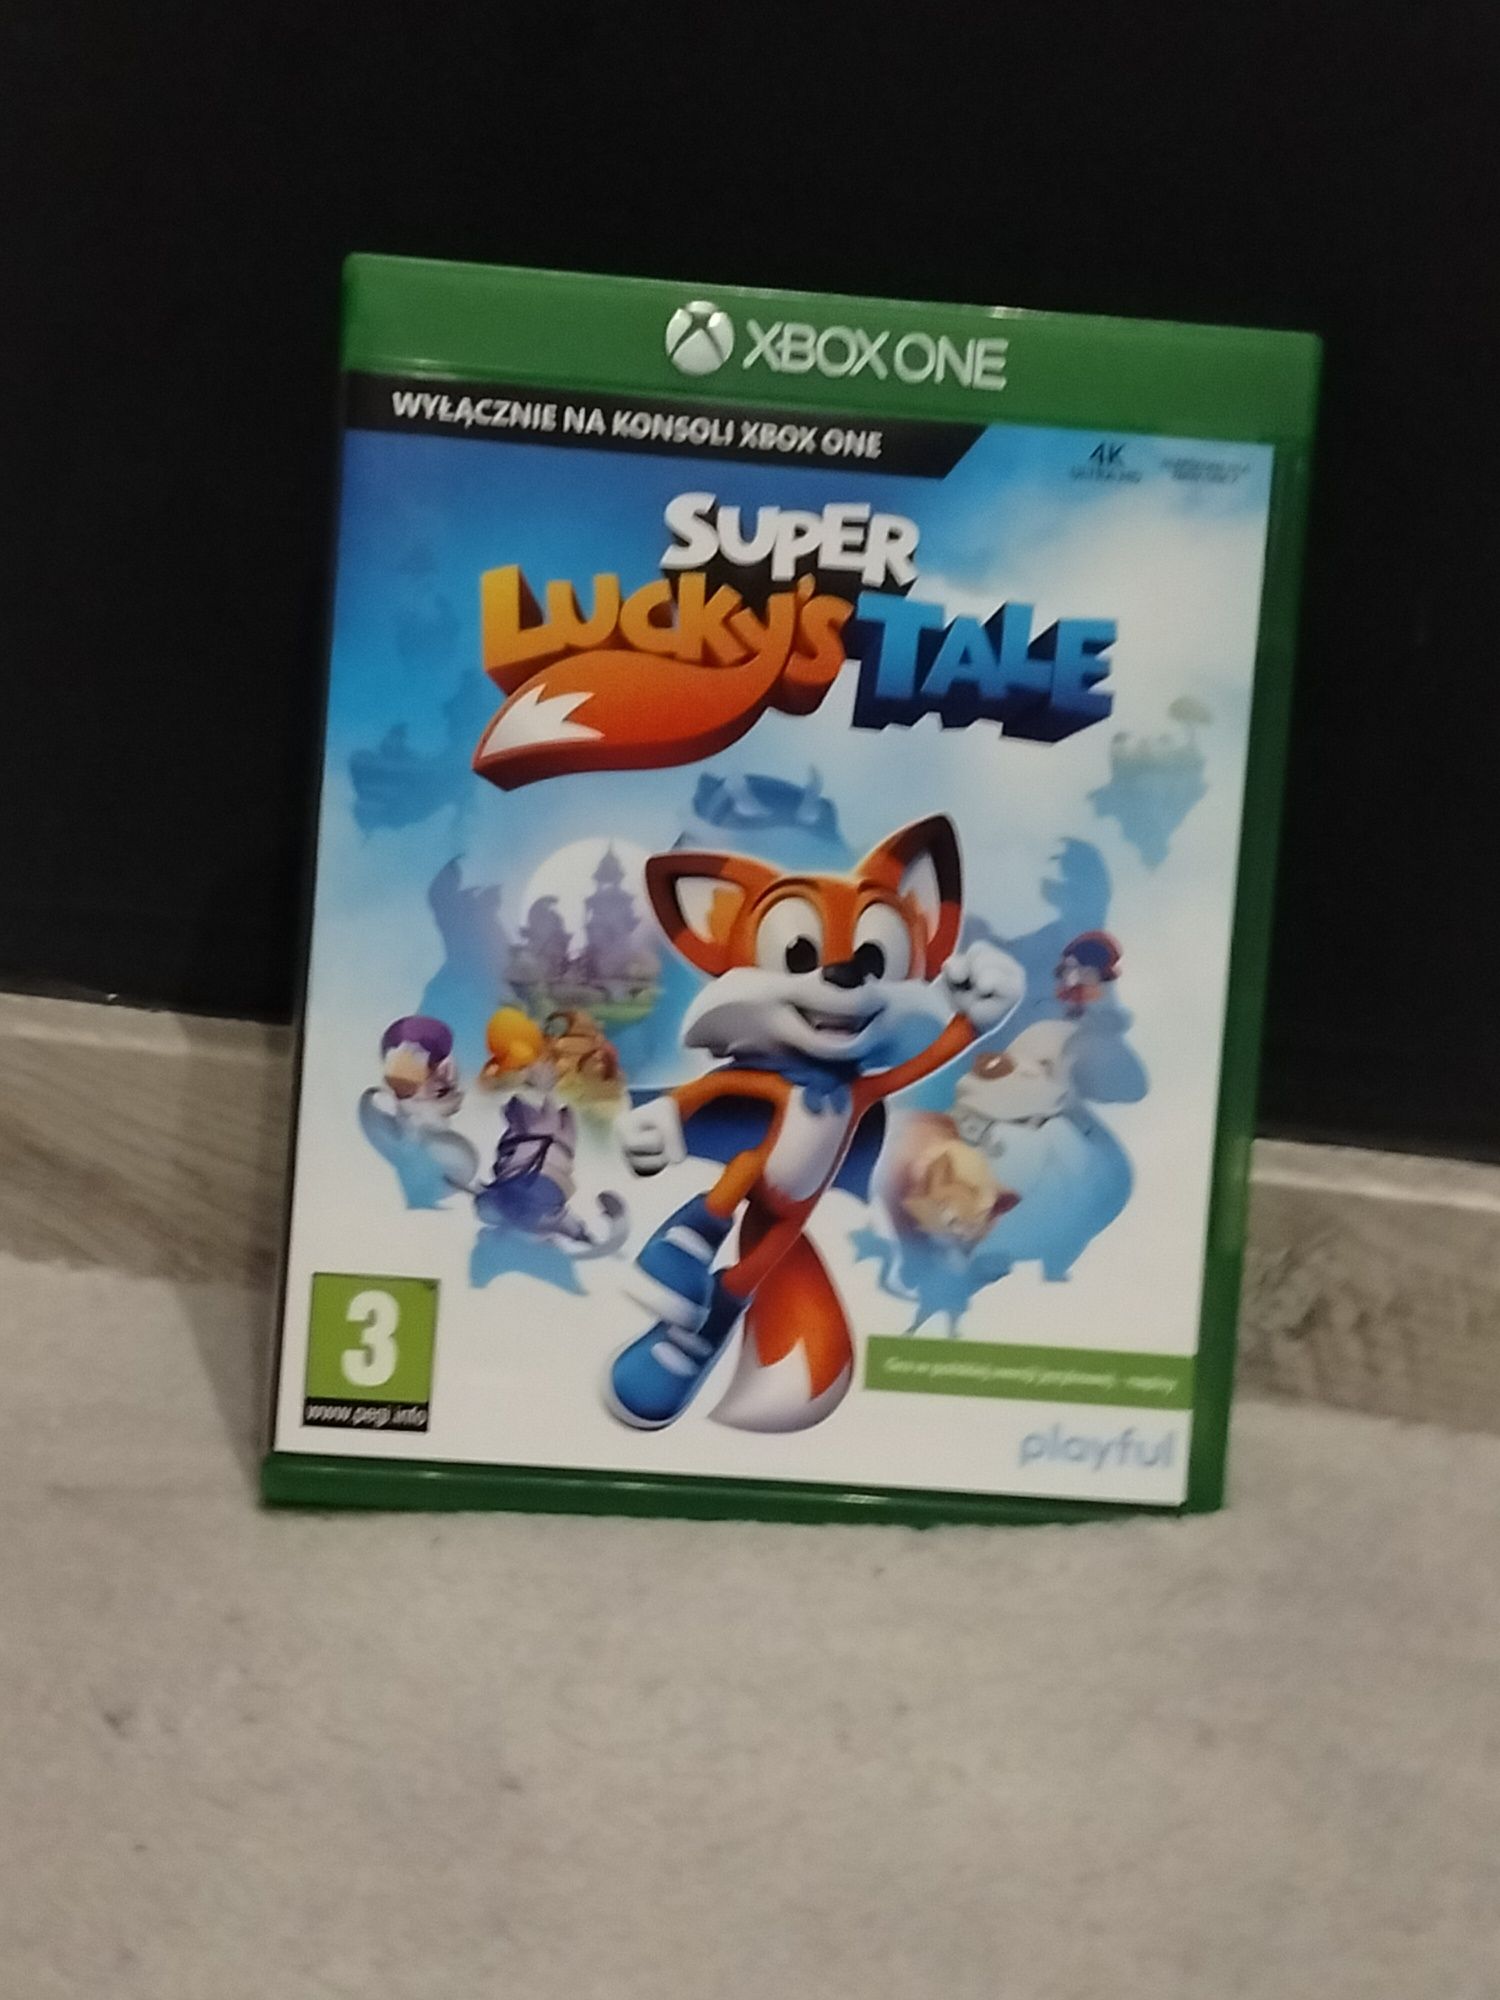 Gra Super lucky's tale na Xbox One